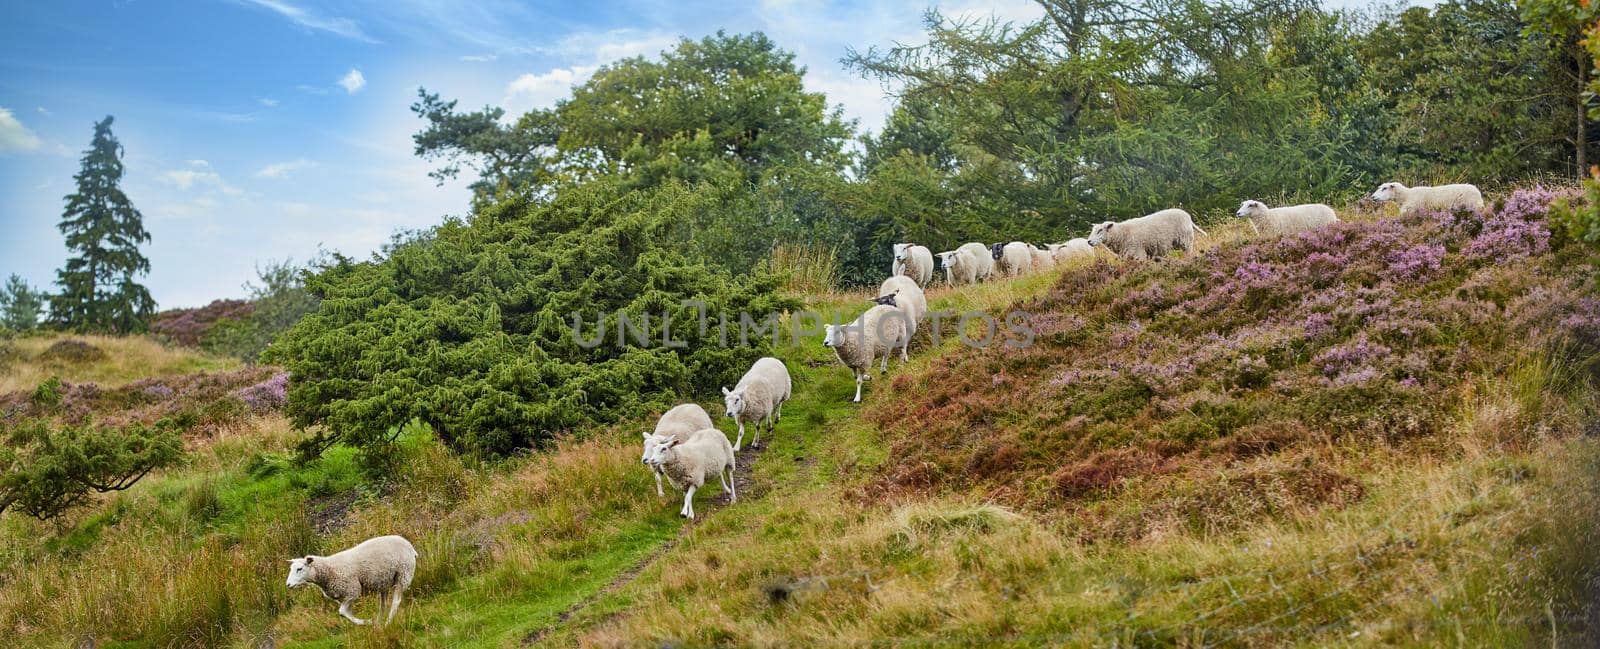 Flock of sheep walking and being herded together on a grazing farm pasture. Group of hairy, wool animals in remote countryside farmland and agriculture estate. Raising livestock for clothing industry.